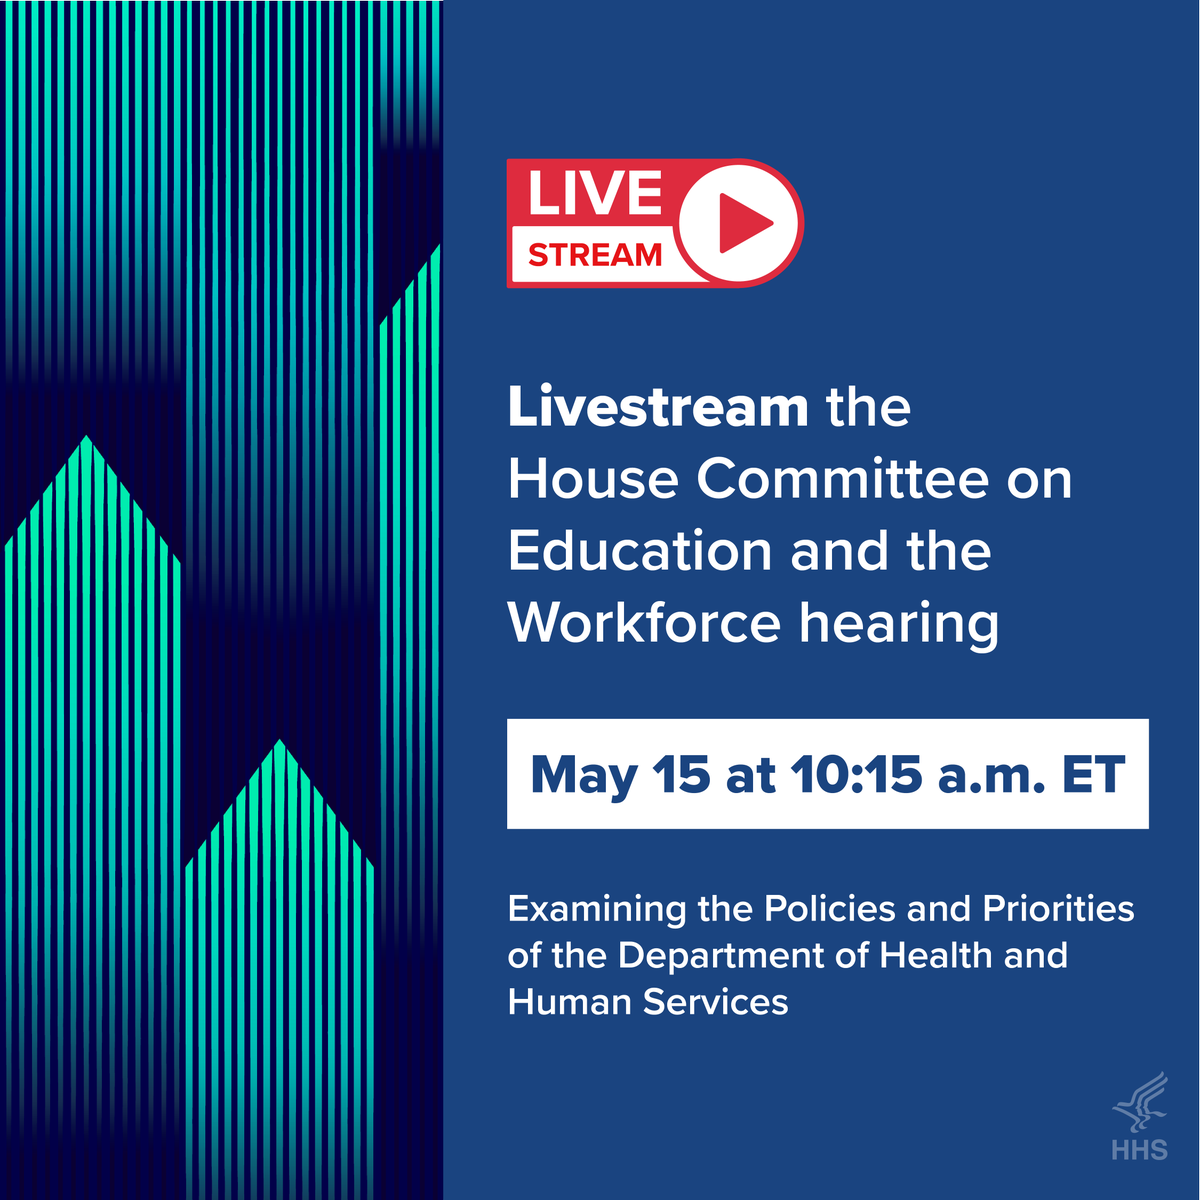 At 10:15 a.m. ET, I will testify in front of the House Committee on Education and the Workforce. The hearing will examine the policies and priorities of the Department of Health and Human Services. You can stream the full committee hearing here: bit.ly/3K2Mc4j